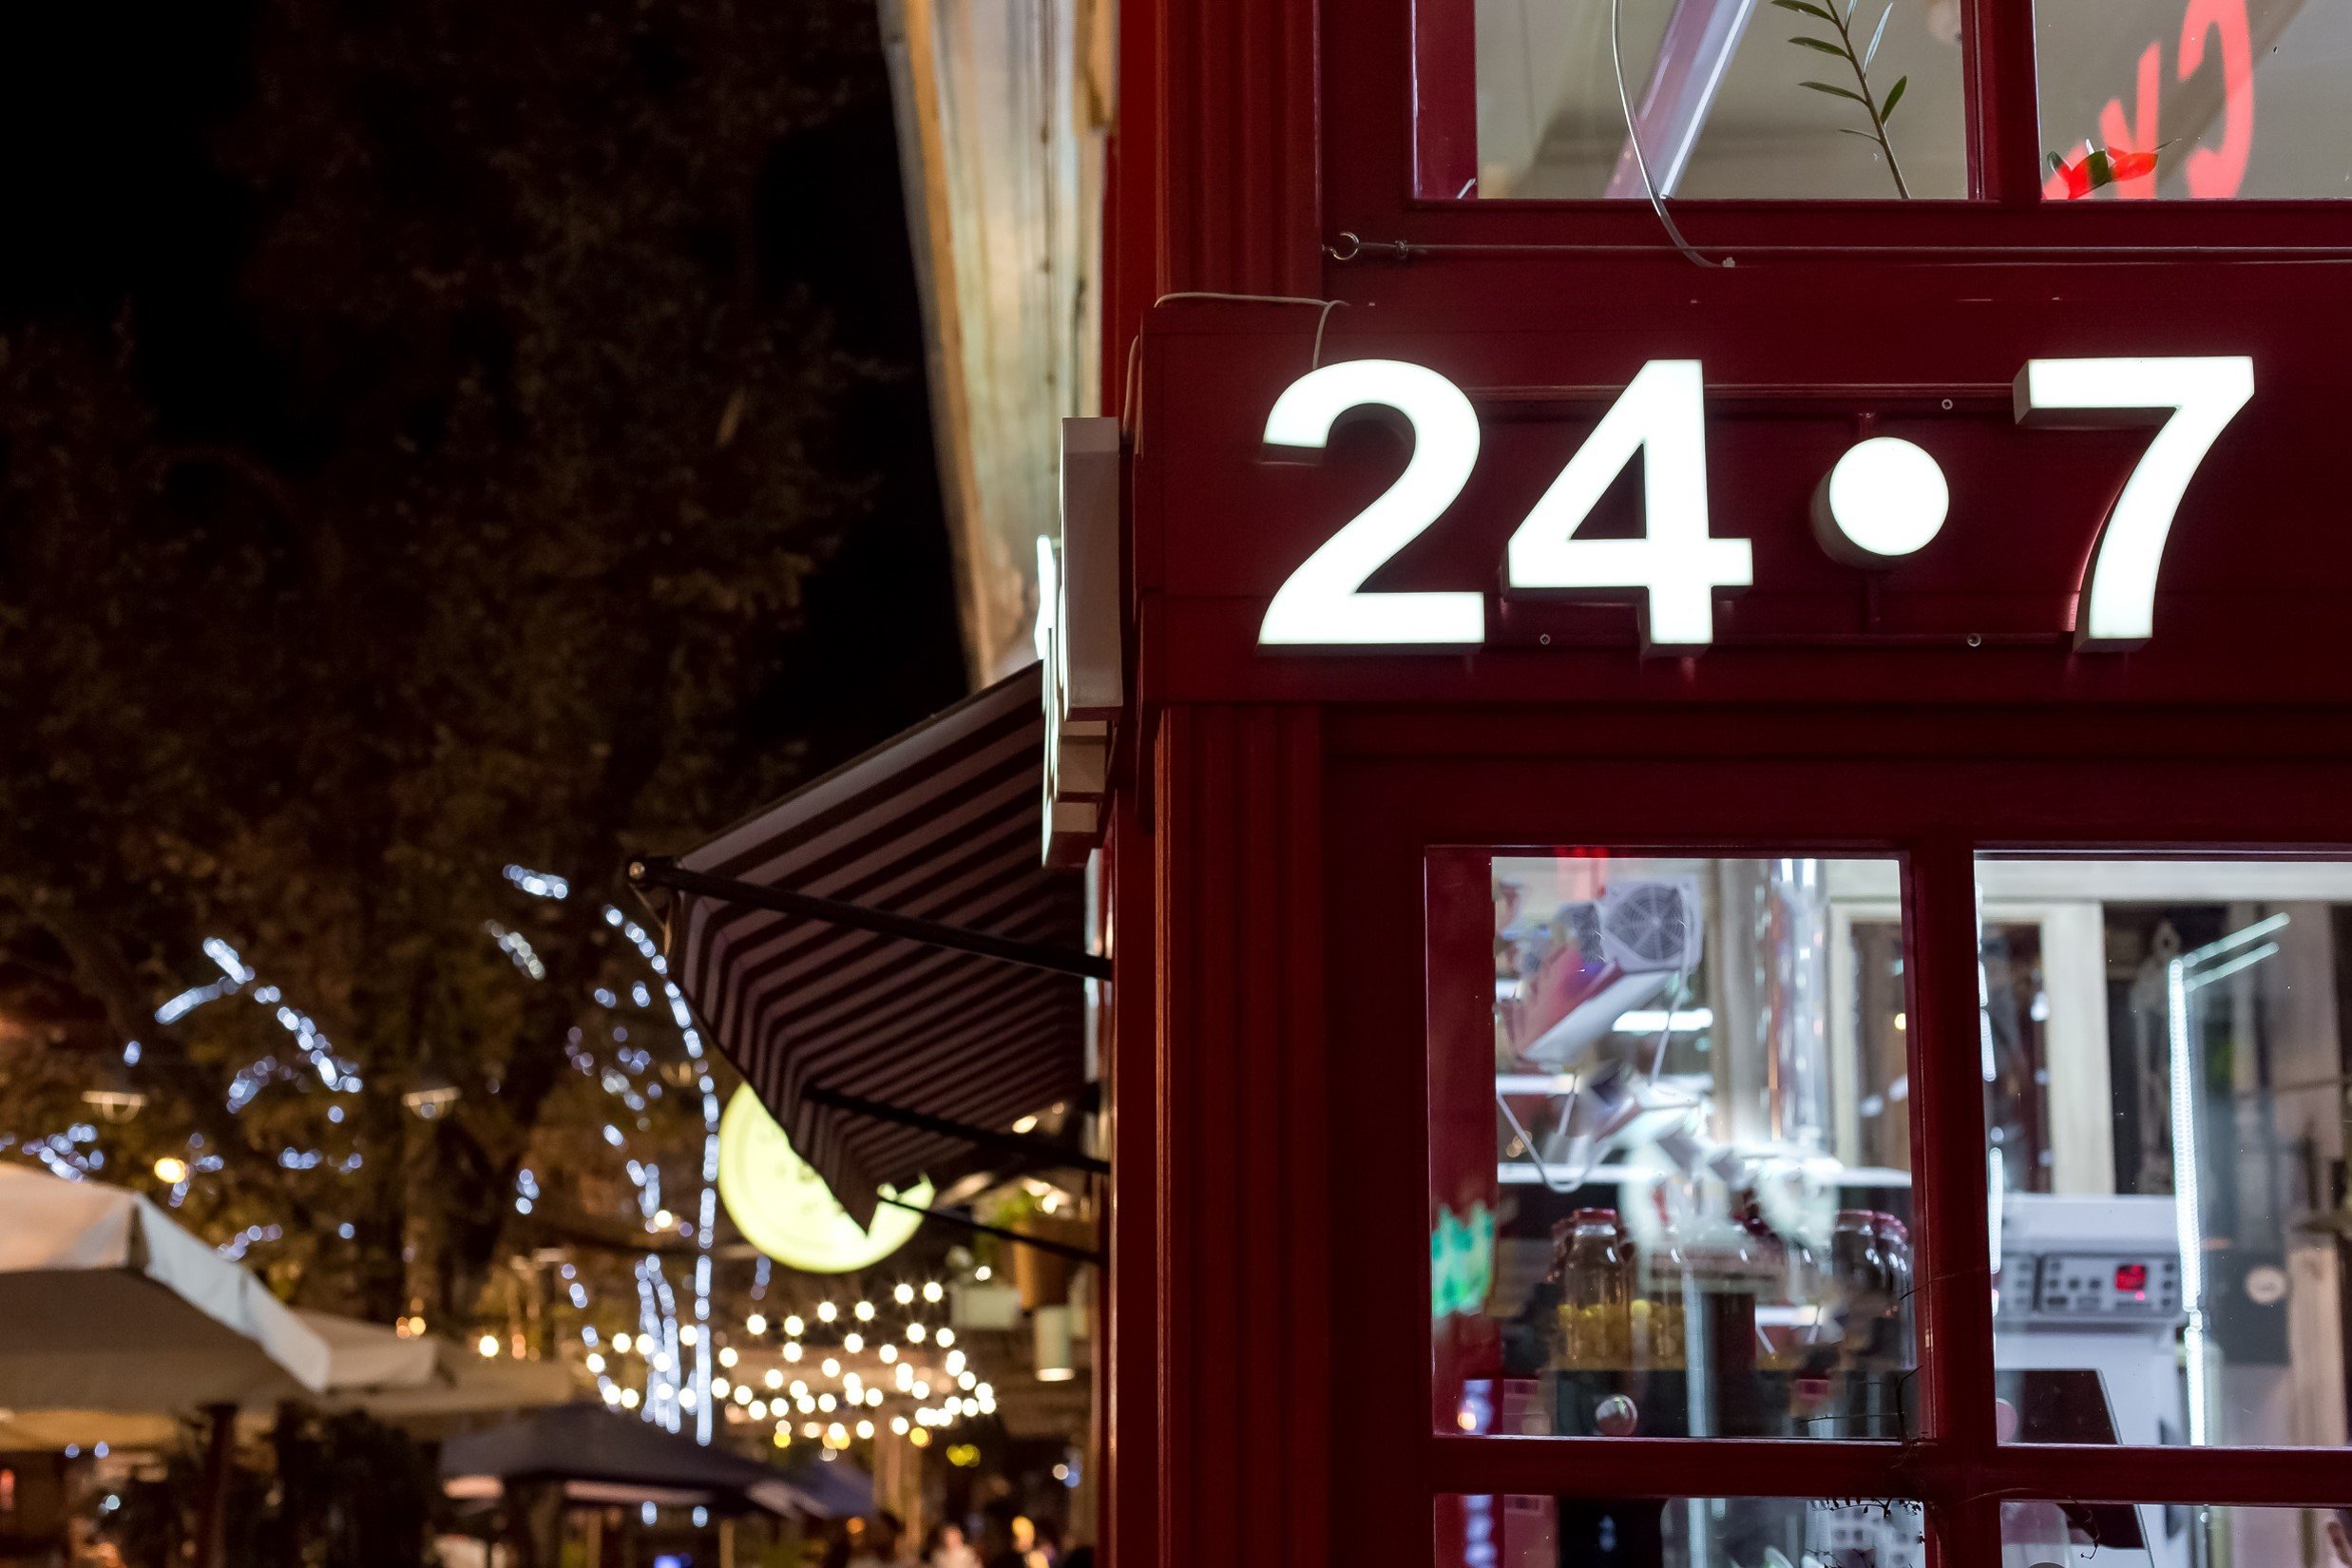 Your establishment is open 24/7, shouldn’t your data be 24/7 too? - Restaurants and Retail are dealing with challenges 24 hours a day, 7 days a week. From Department stores to Grocery stores, Strip Malls to Gas Stations, Dine in to Drive thru, we help prioritize where data can make the most impact for your business.